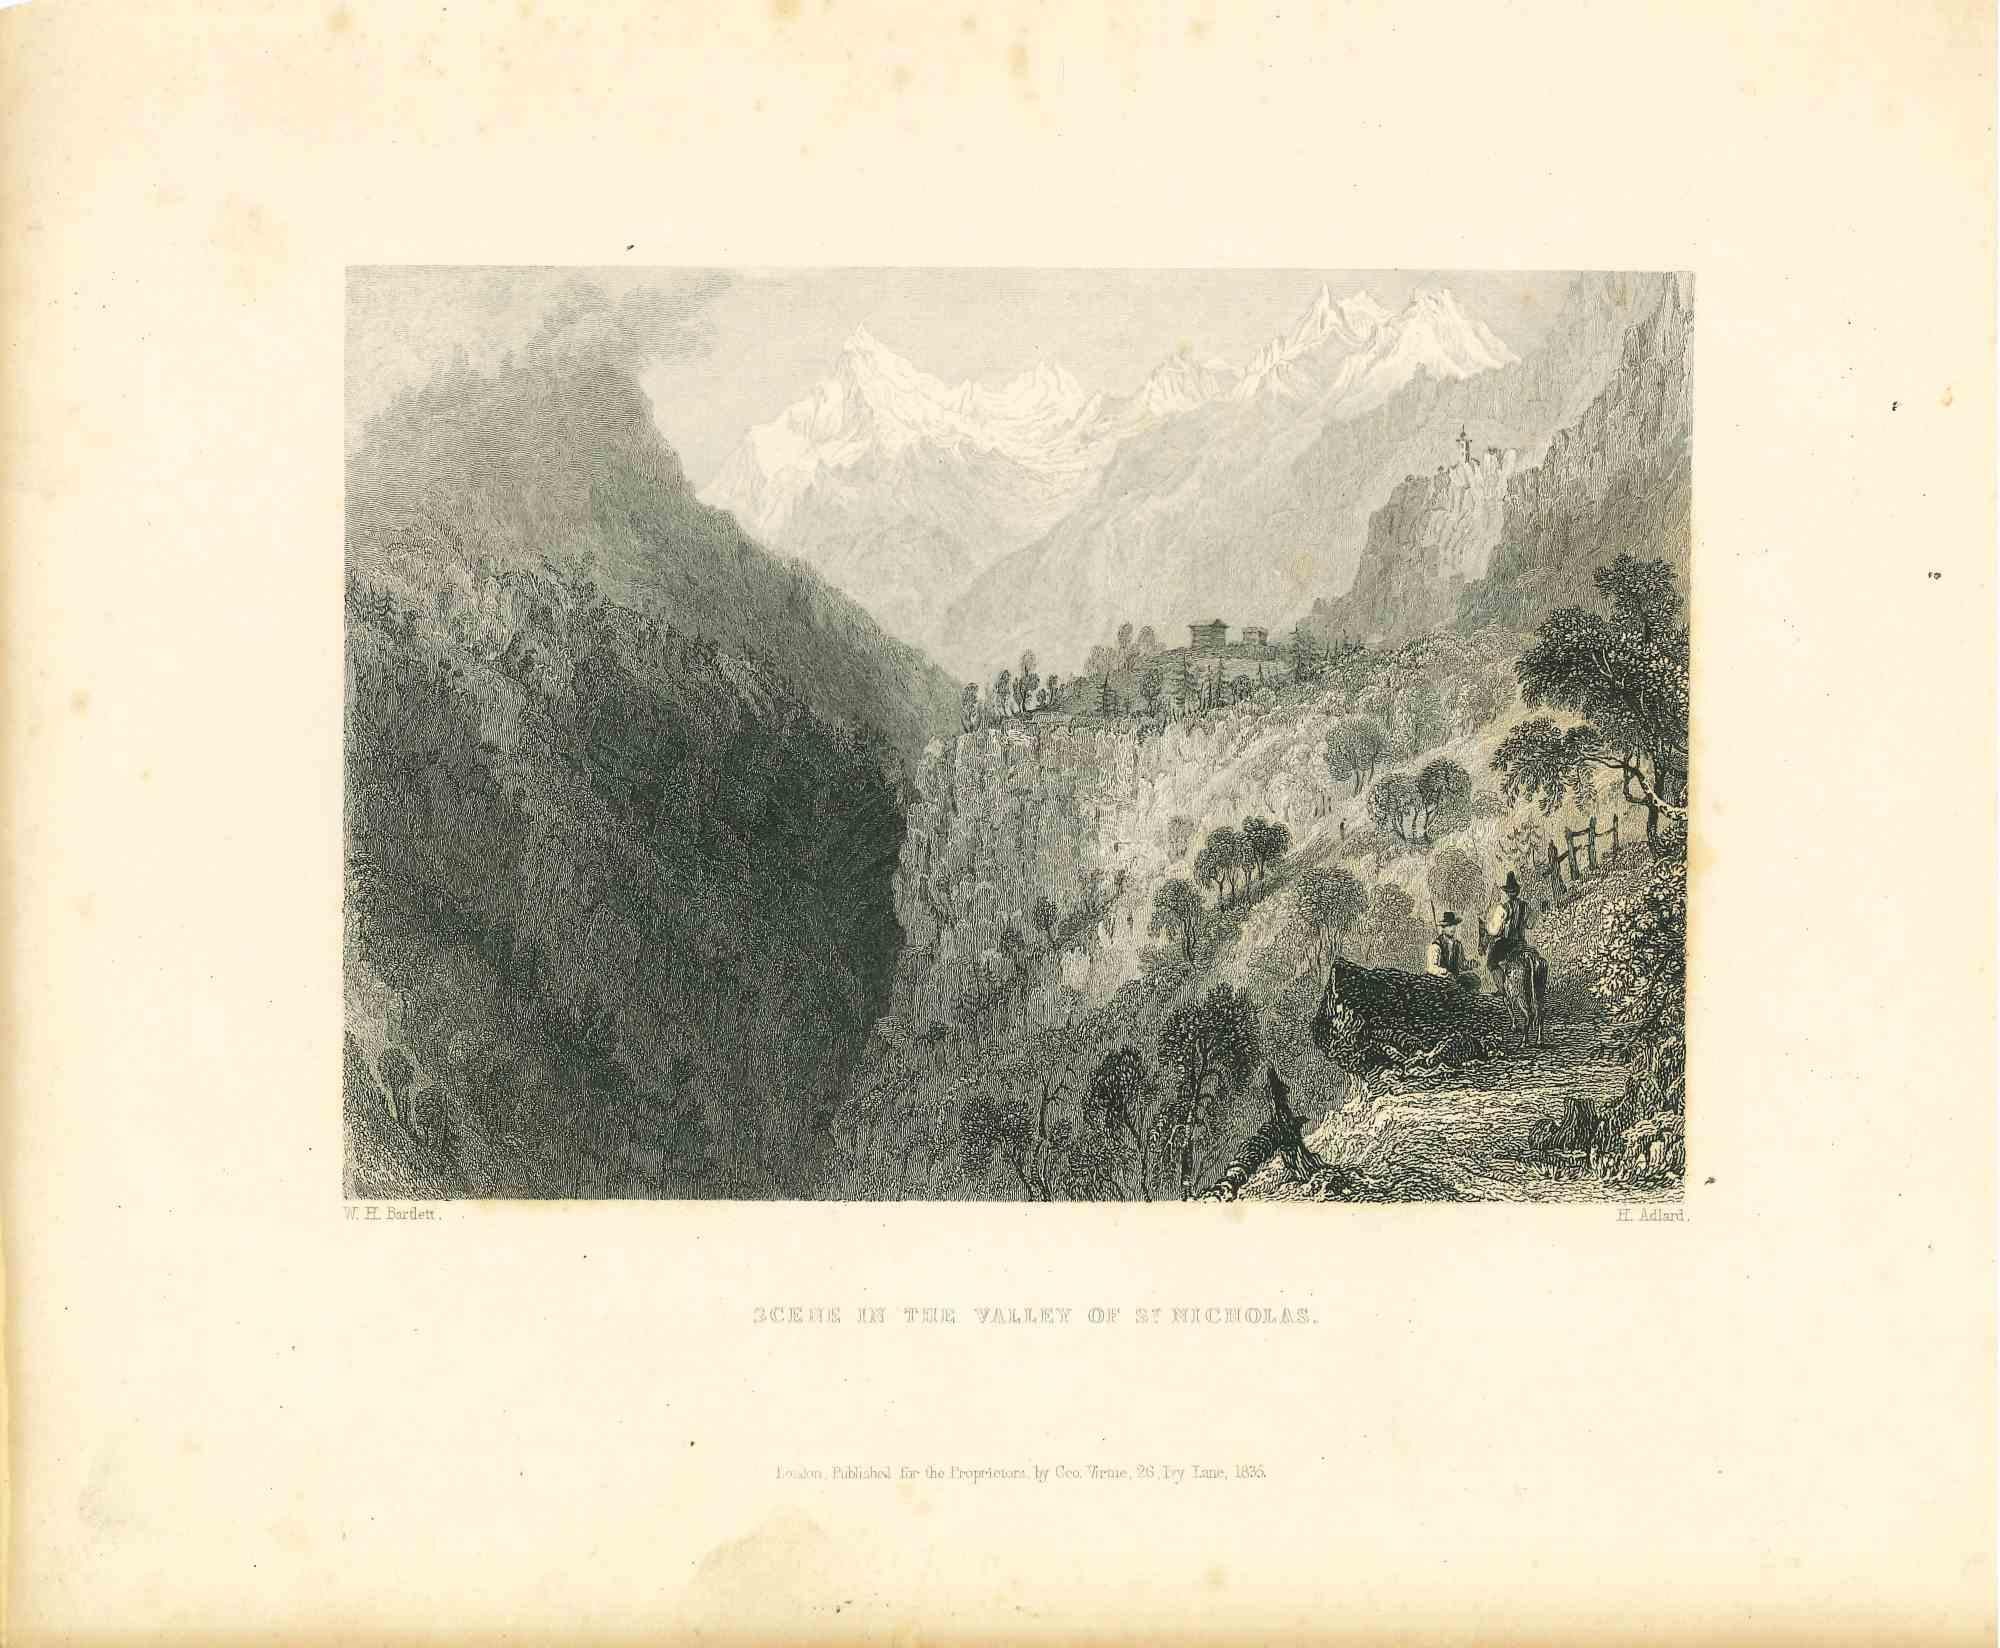 Unknown Figurative Print - Ancient View ofValley of St. Nicholas - Original Lithograph - Mid-19th Century